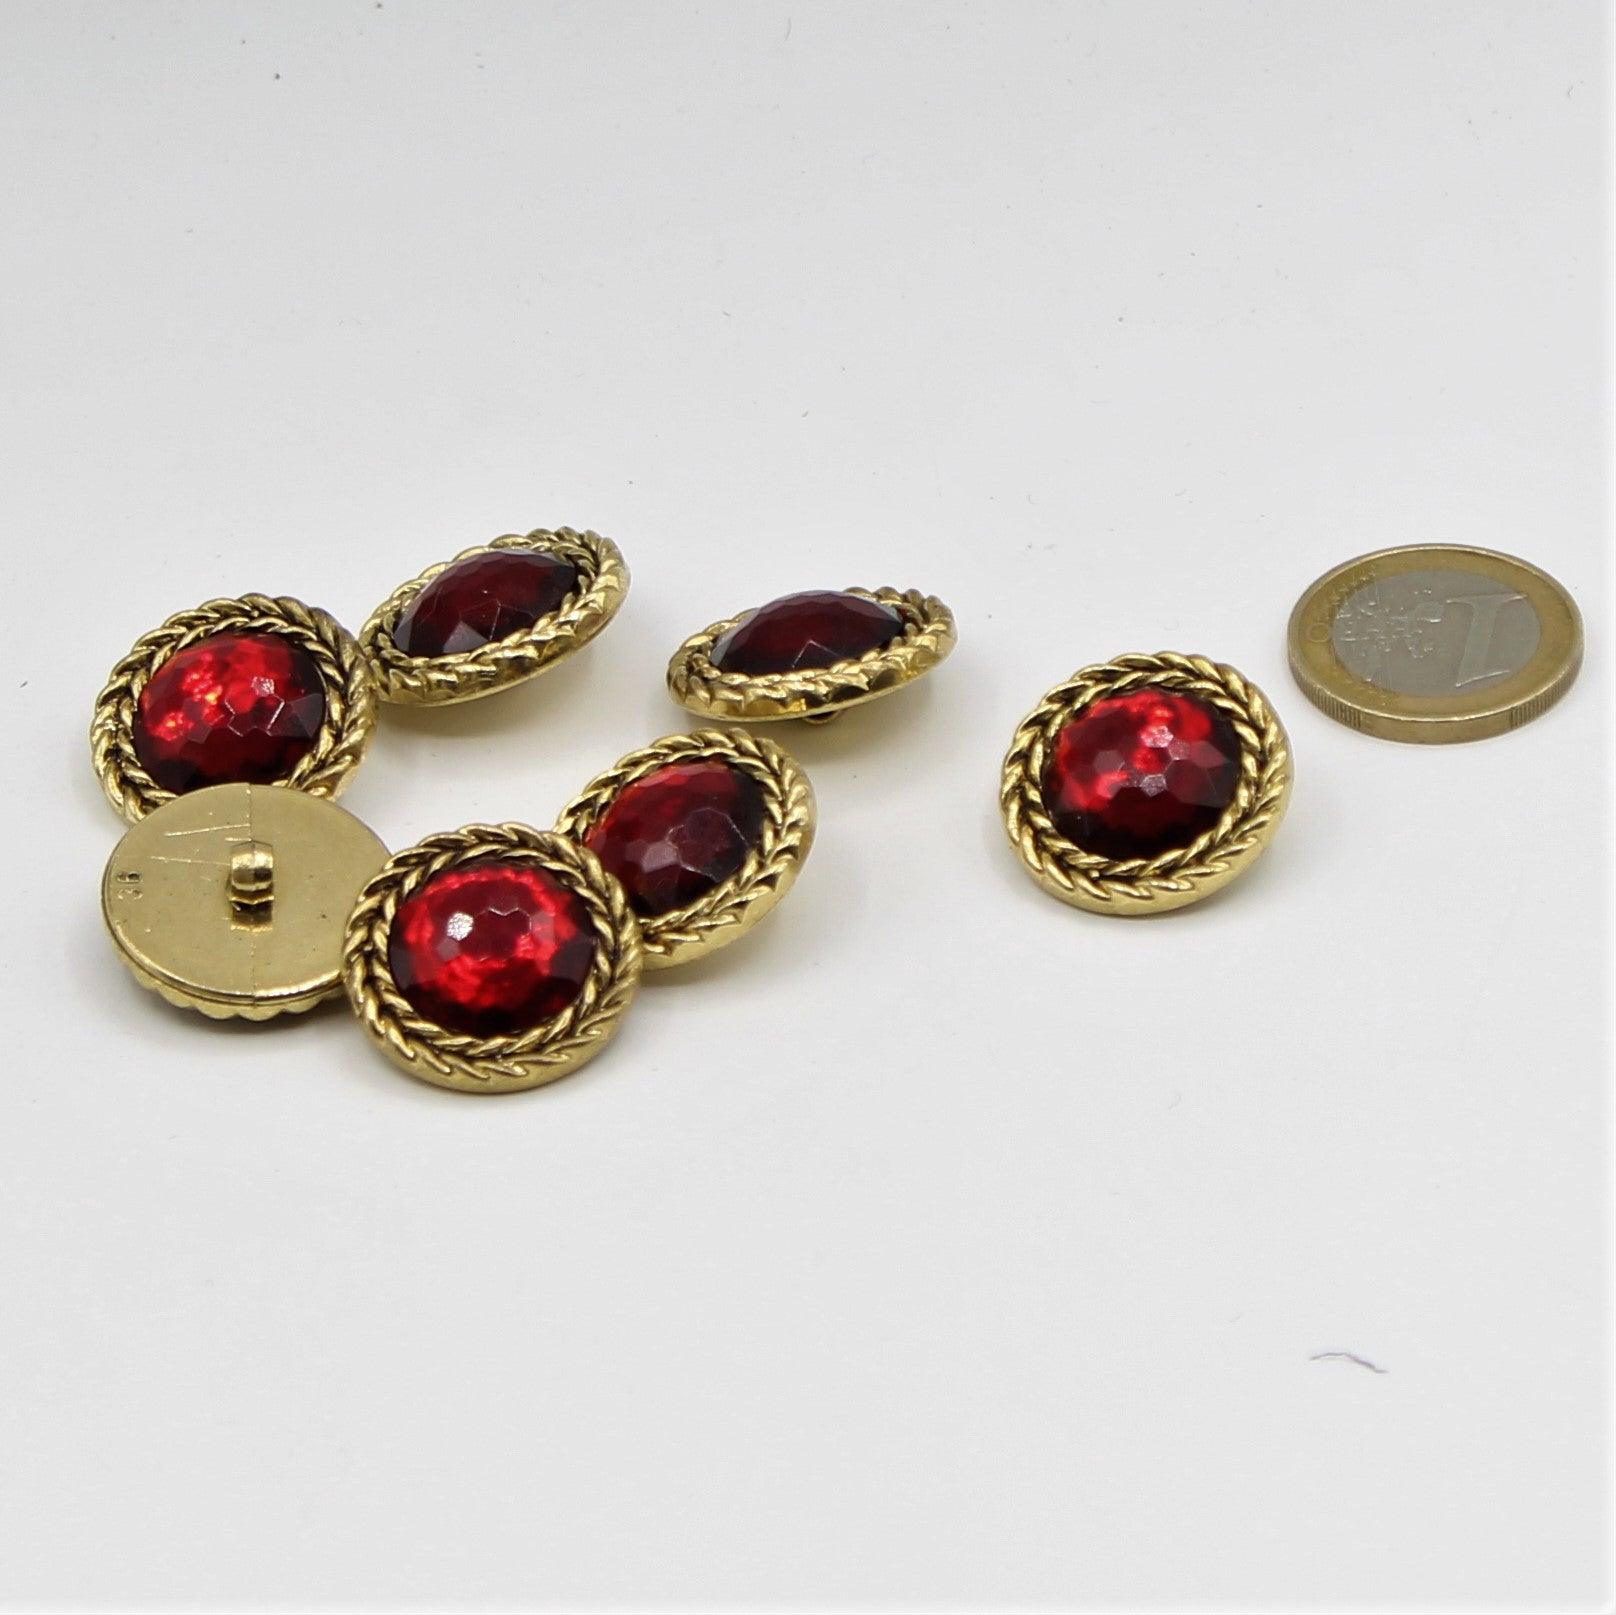 6 and 13 mm Red Jewel Core Button with Gold Circle - ACCESSOIRES LEDUC